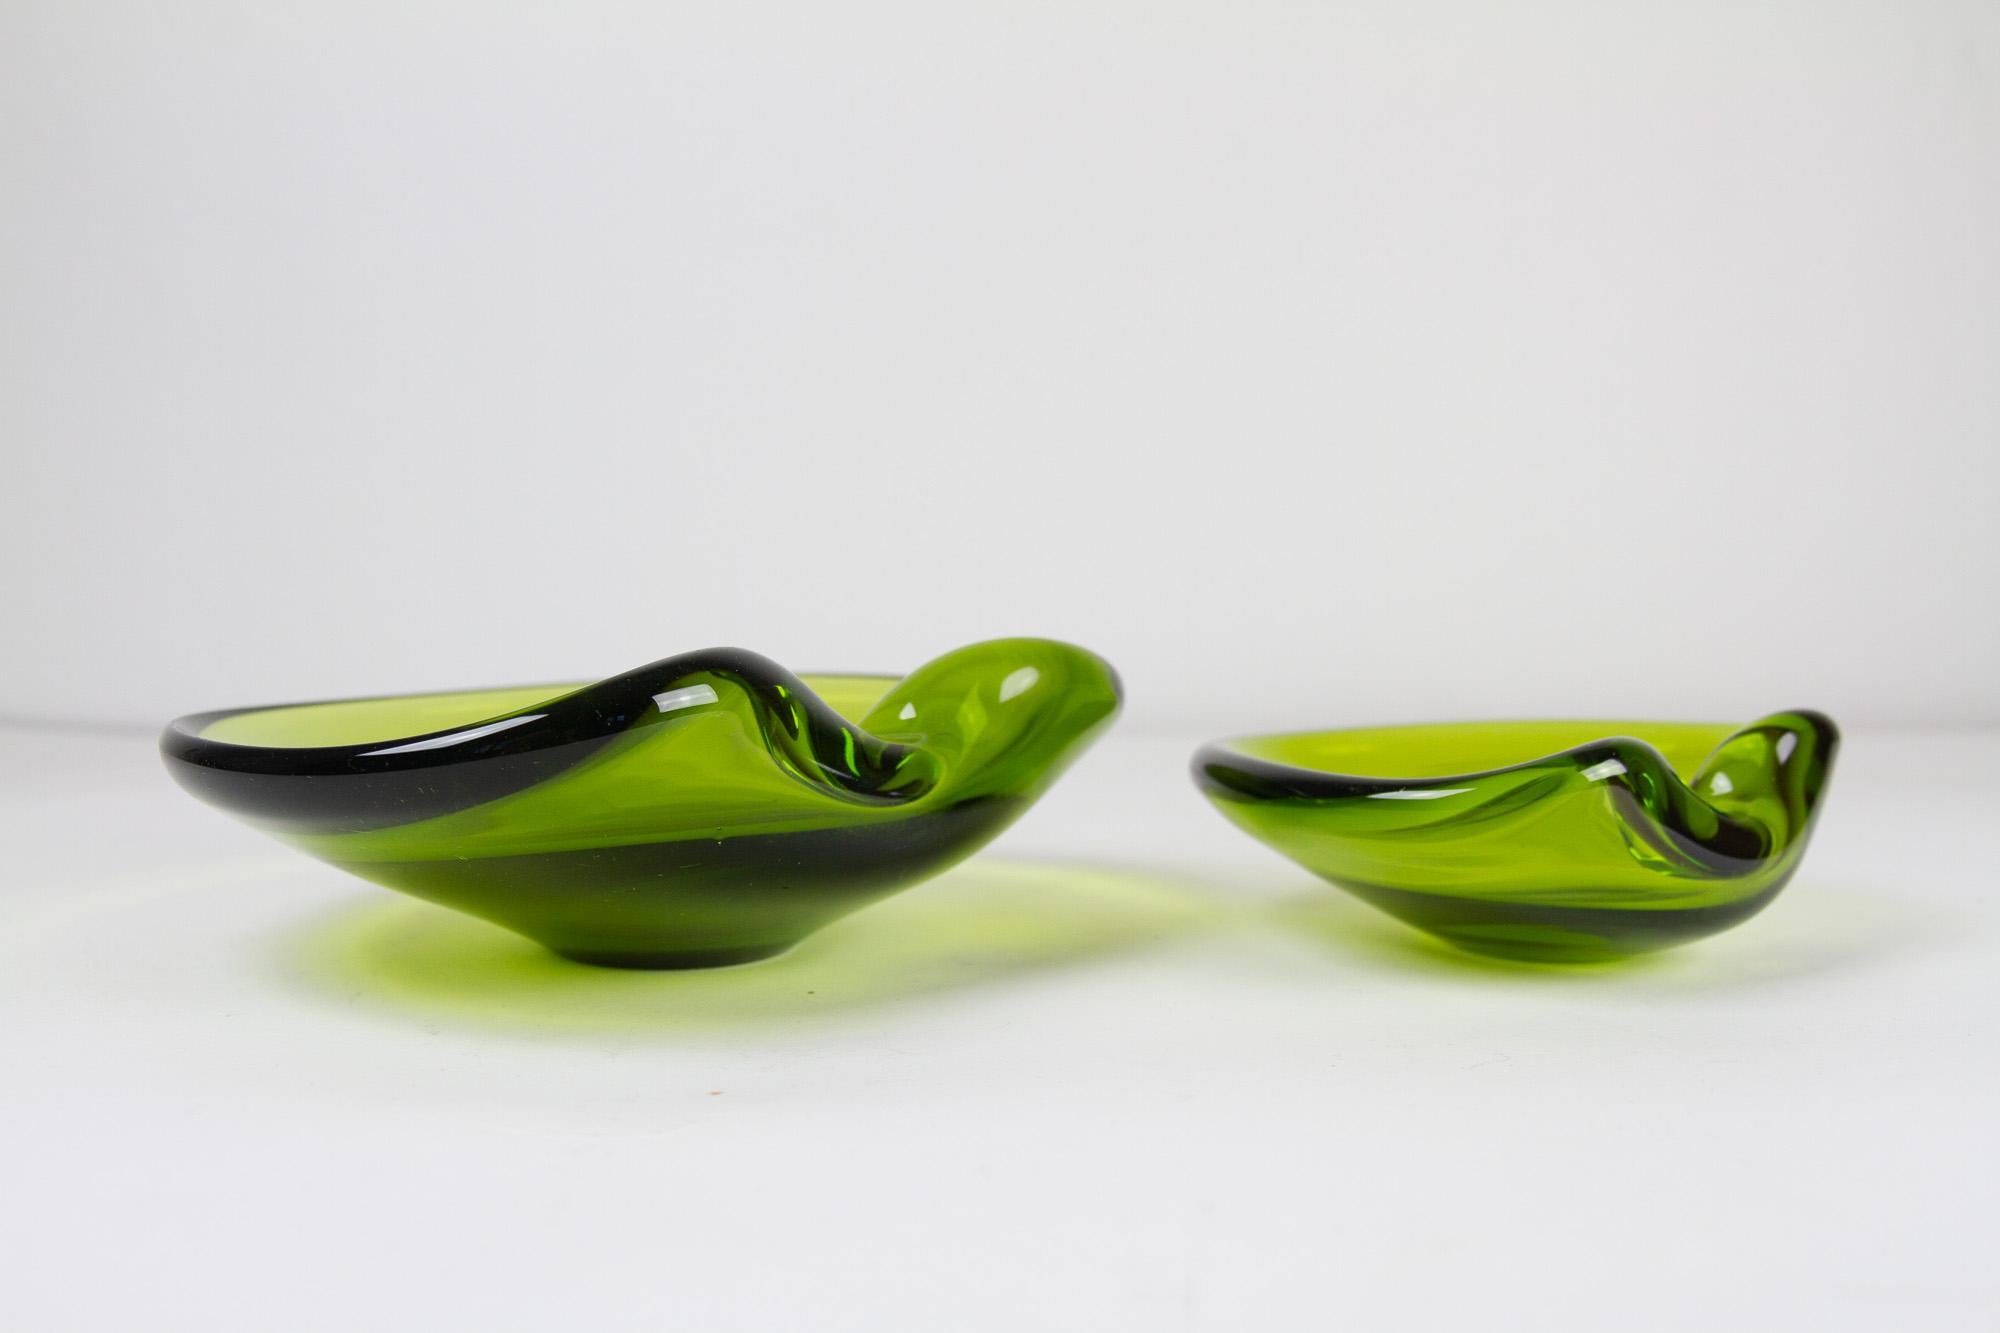 Vintage Danish Pair of Maygreen Glass Bowls by Per Lütken, 1950s, Set of 2 In Good Condition For Sale In Asaa, DK